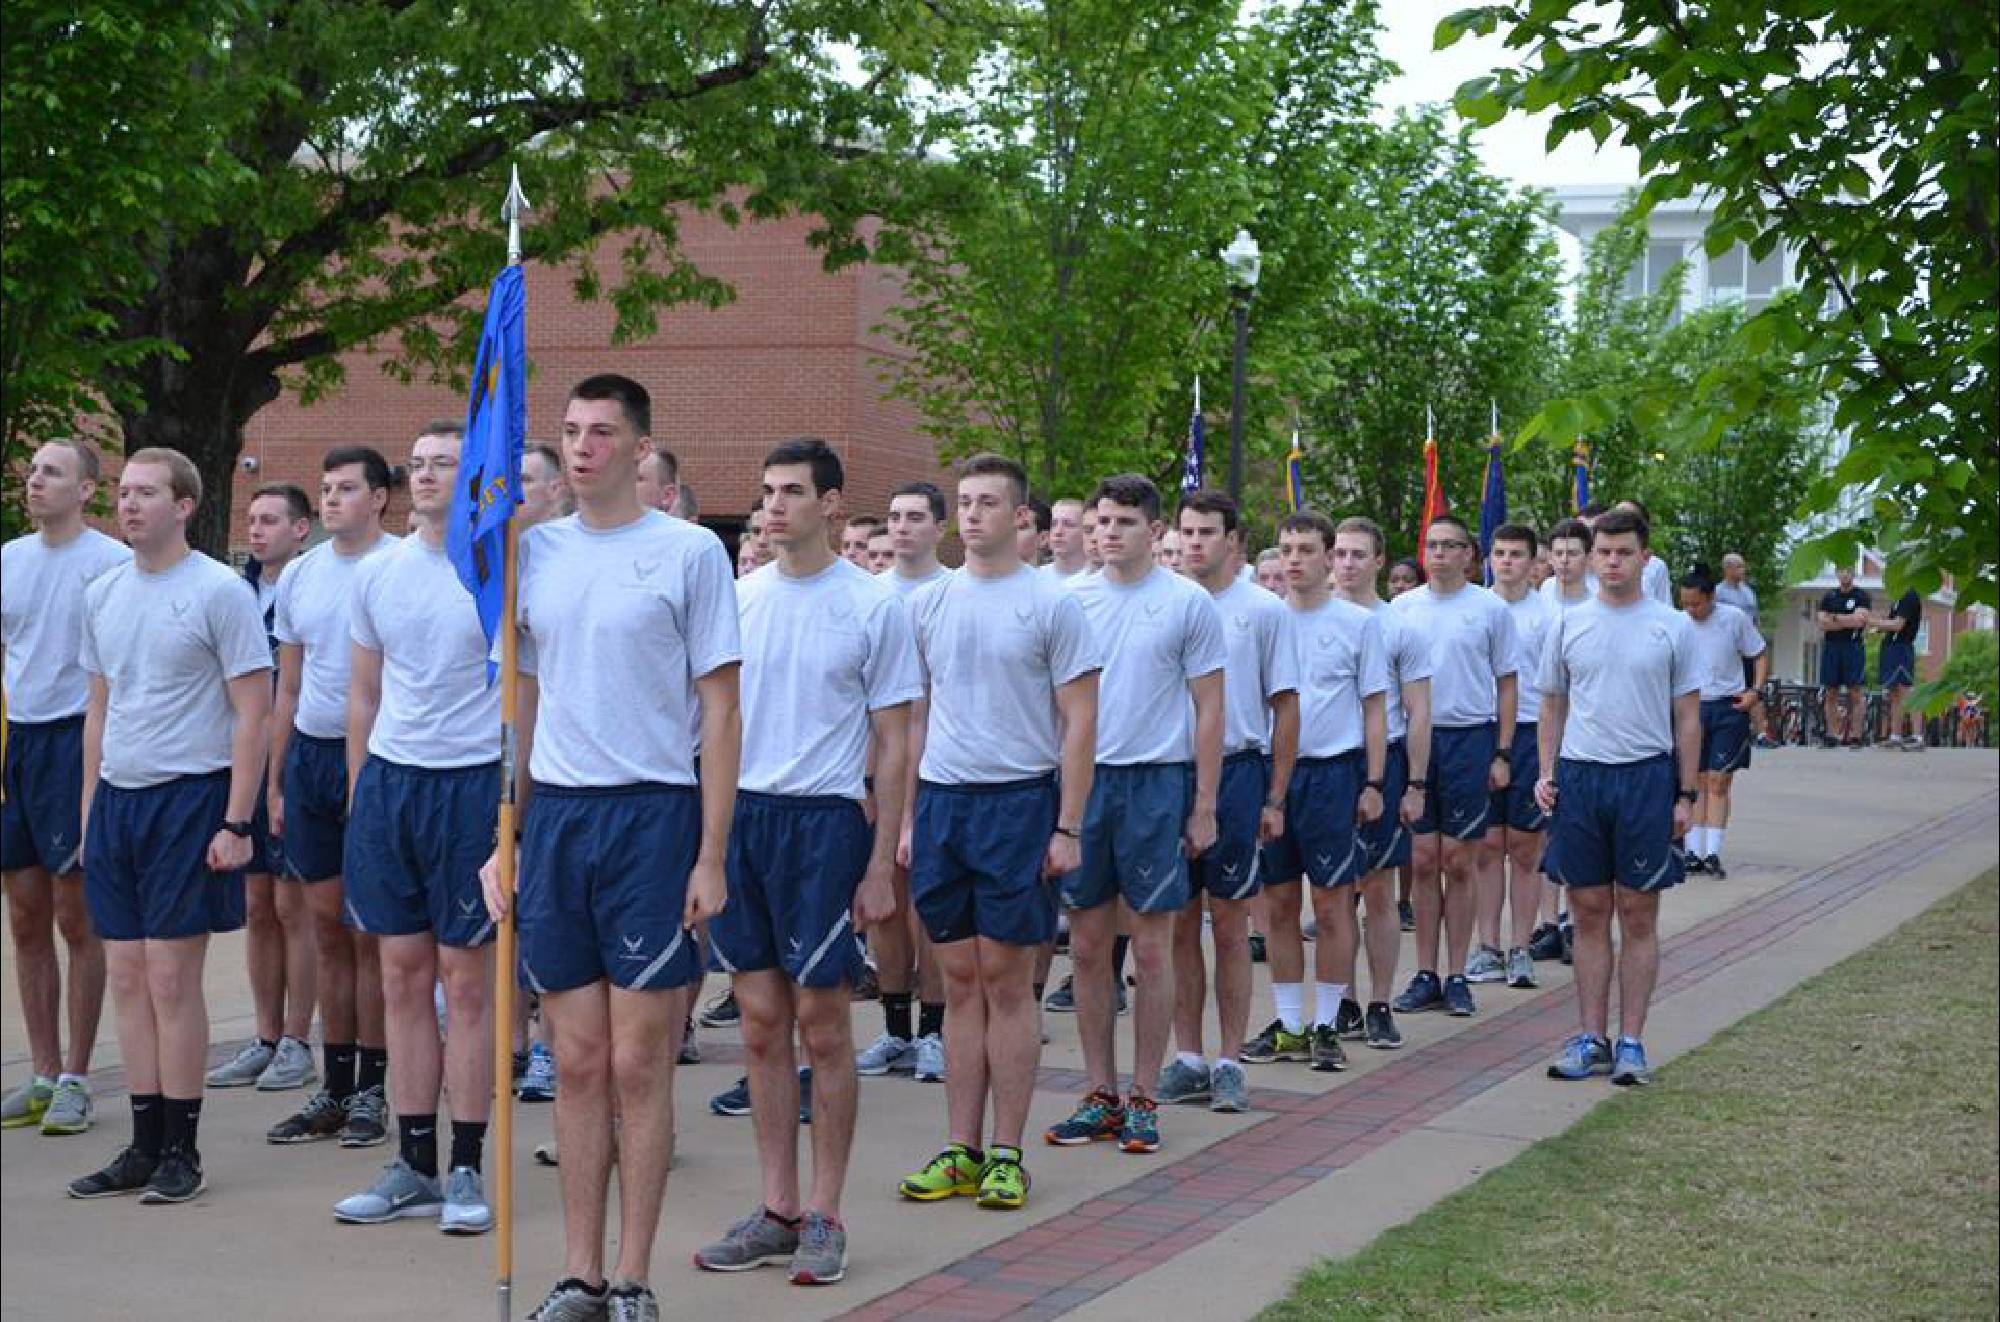 AFROTC students standing at attention.